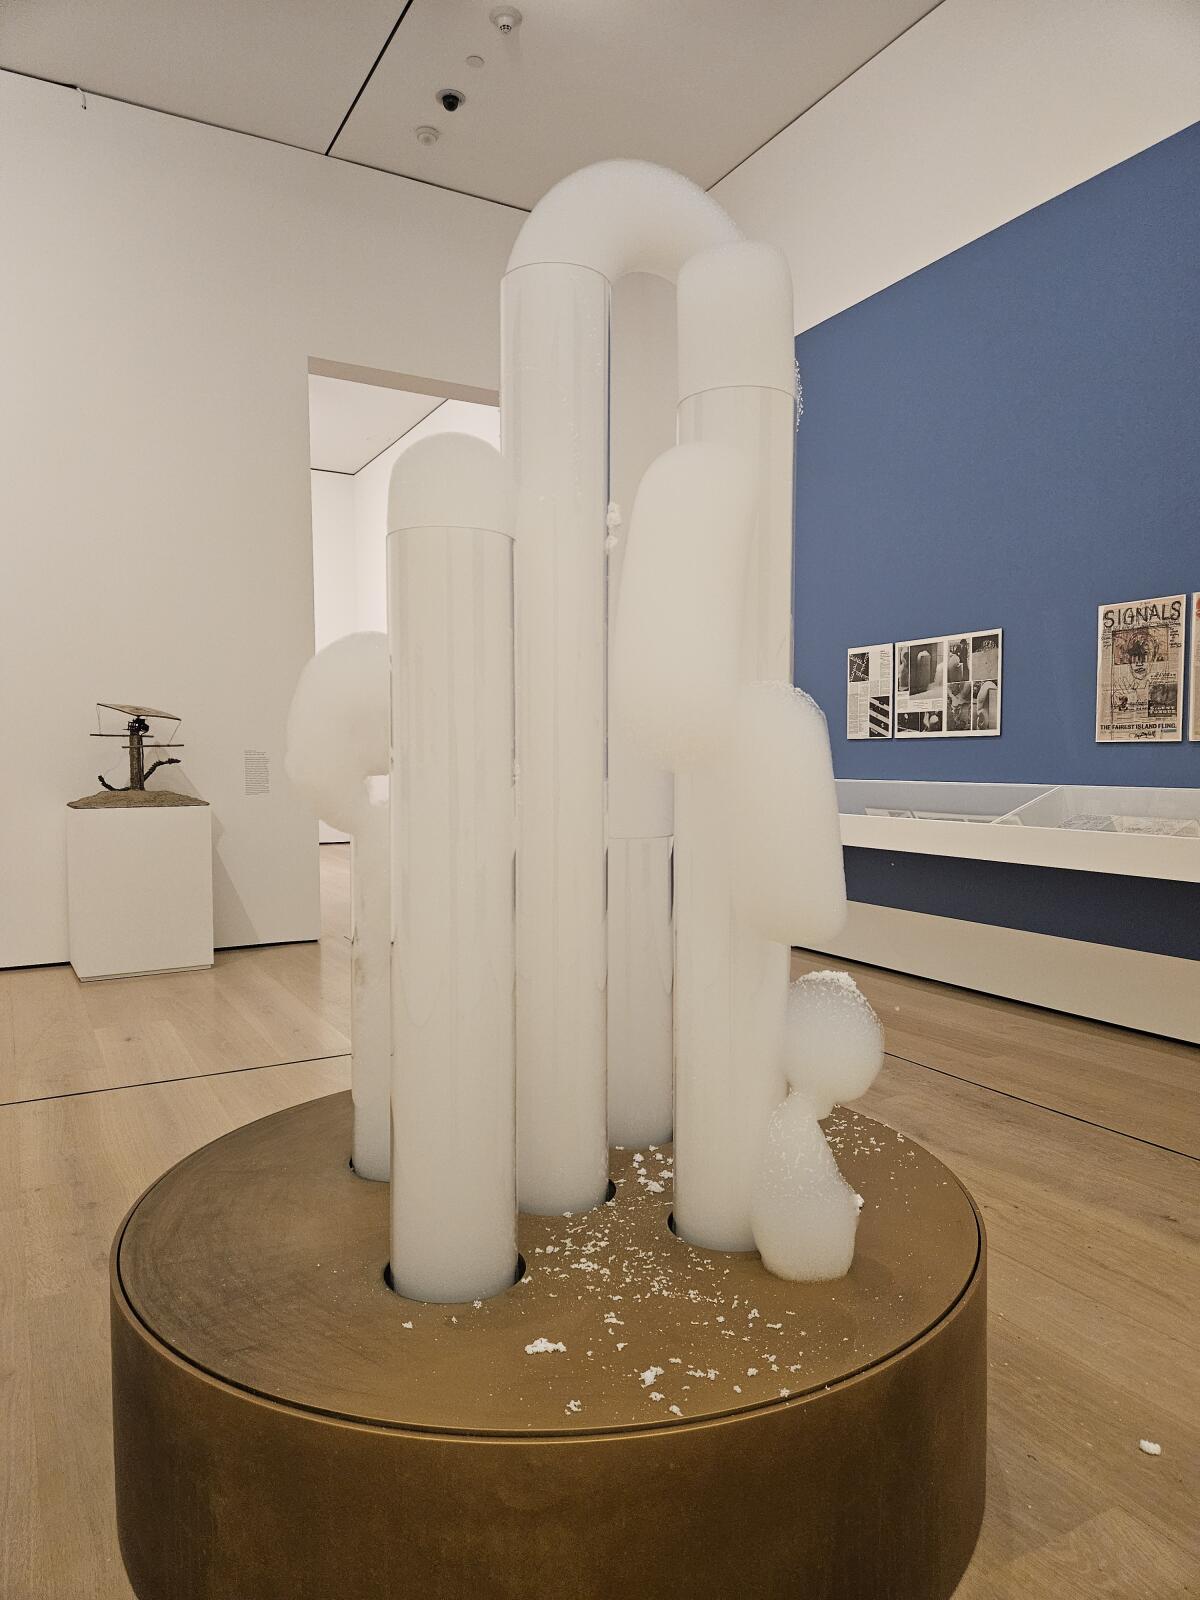 David Medalla's erupting soap-bubble sculptures, "Cloud Canyon," were first shown in 1964.